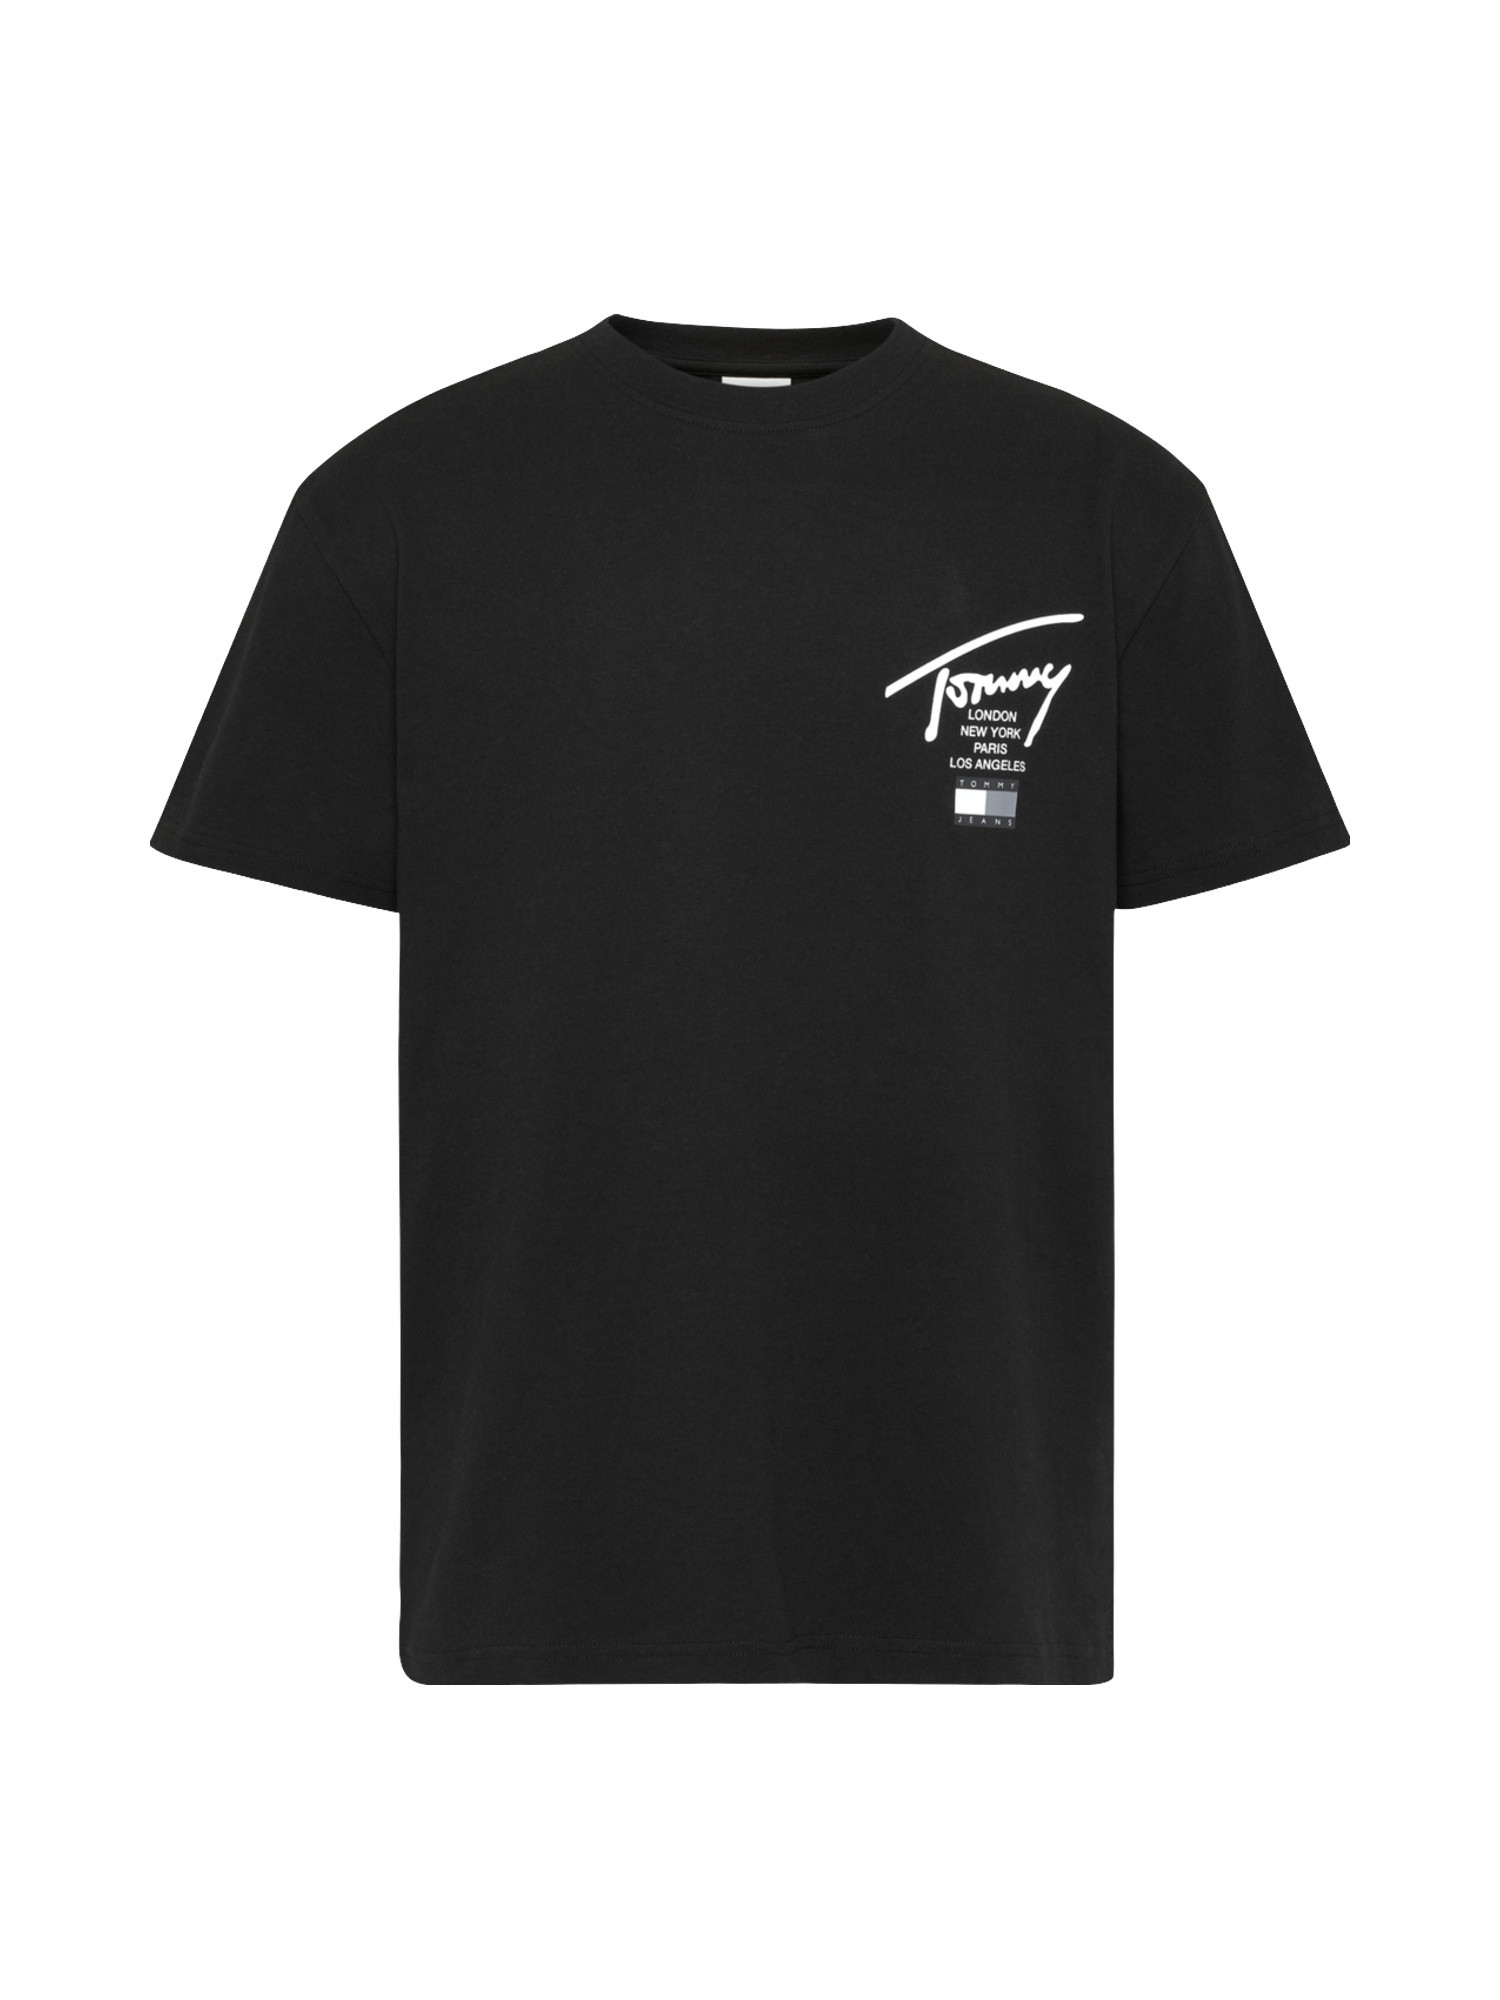 T-shirt with signature print, Black, large image number 0